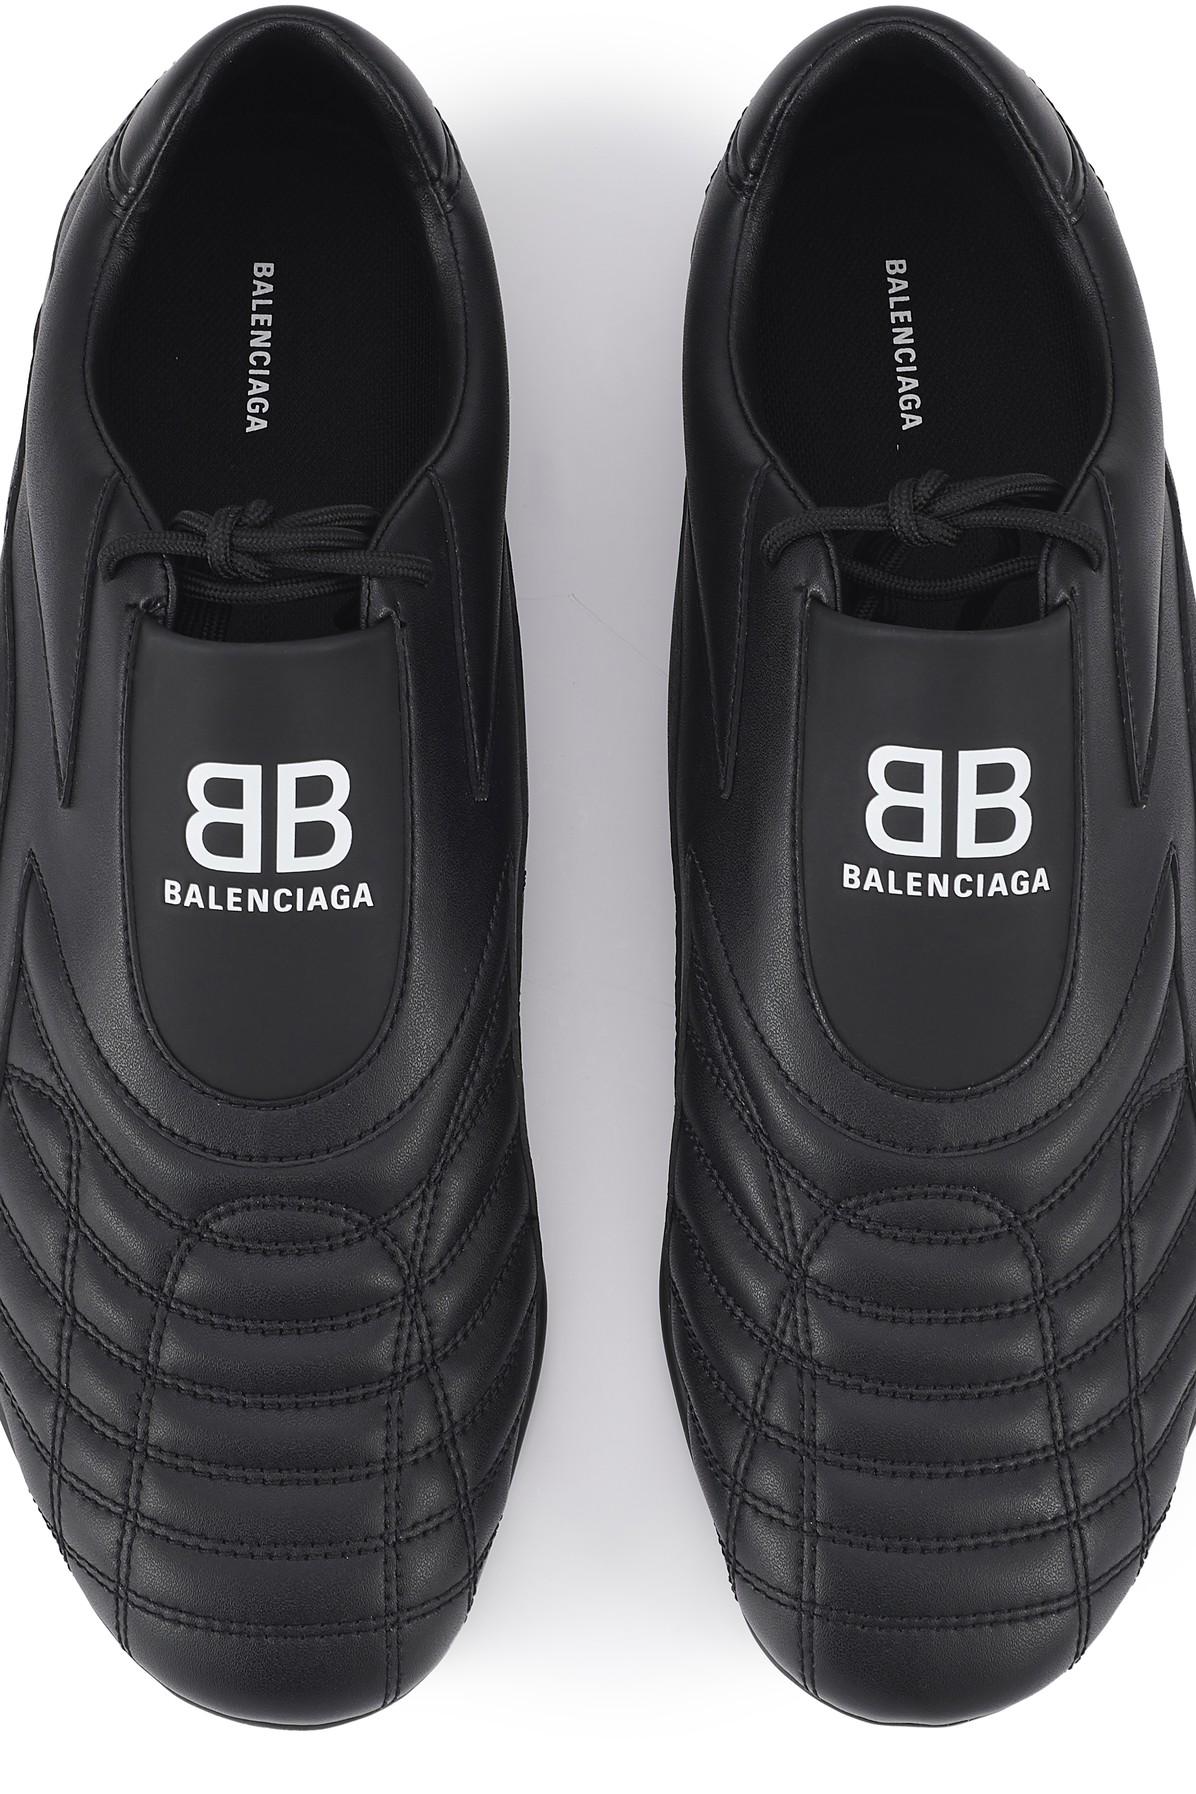 Balenciaga Men's Zen Panelled Faux-leather Slip-on Trainers in Black for  Men - Save 70% - Lyst